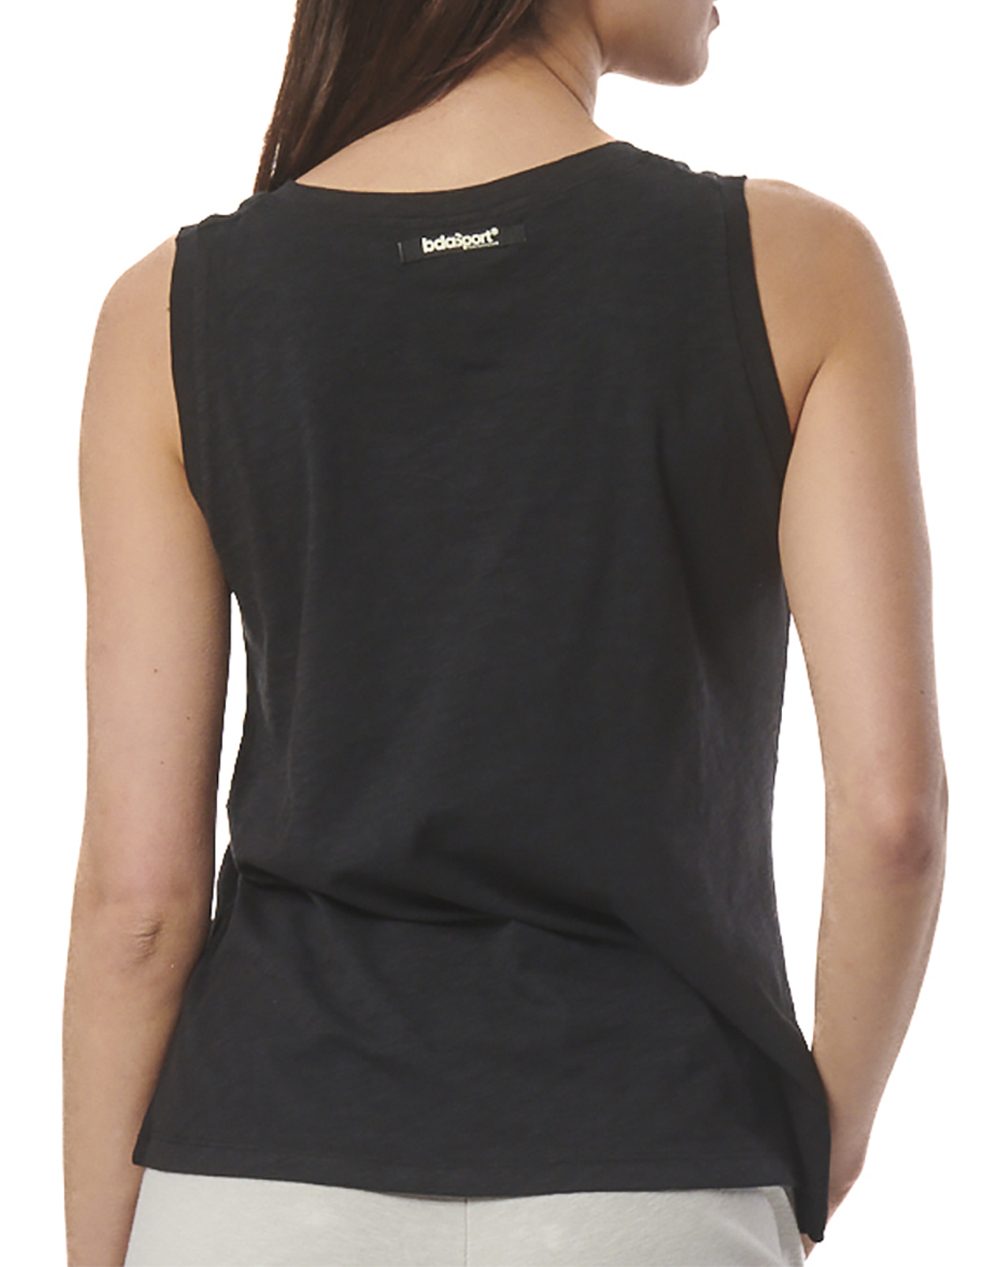 BODY ACTION WOMENS TEXTURED V-NECK TANK TOP